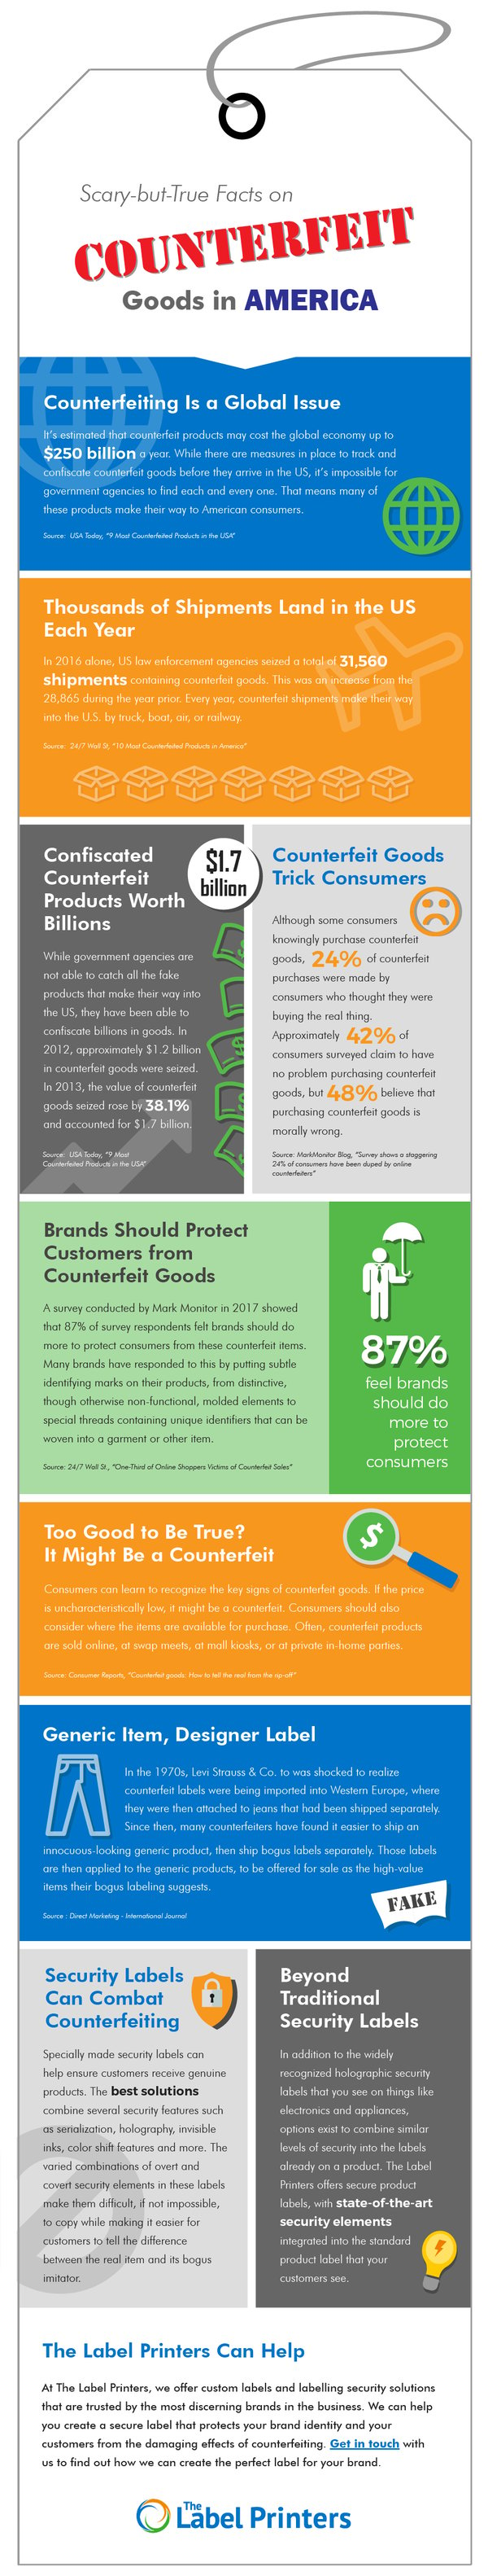 Counterfeit Good in America Fast Facts